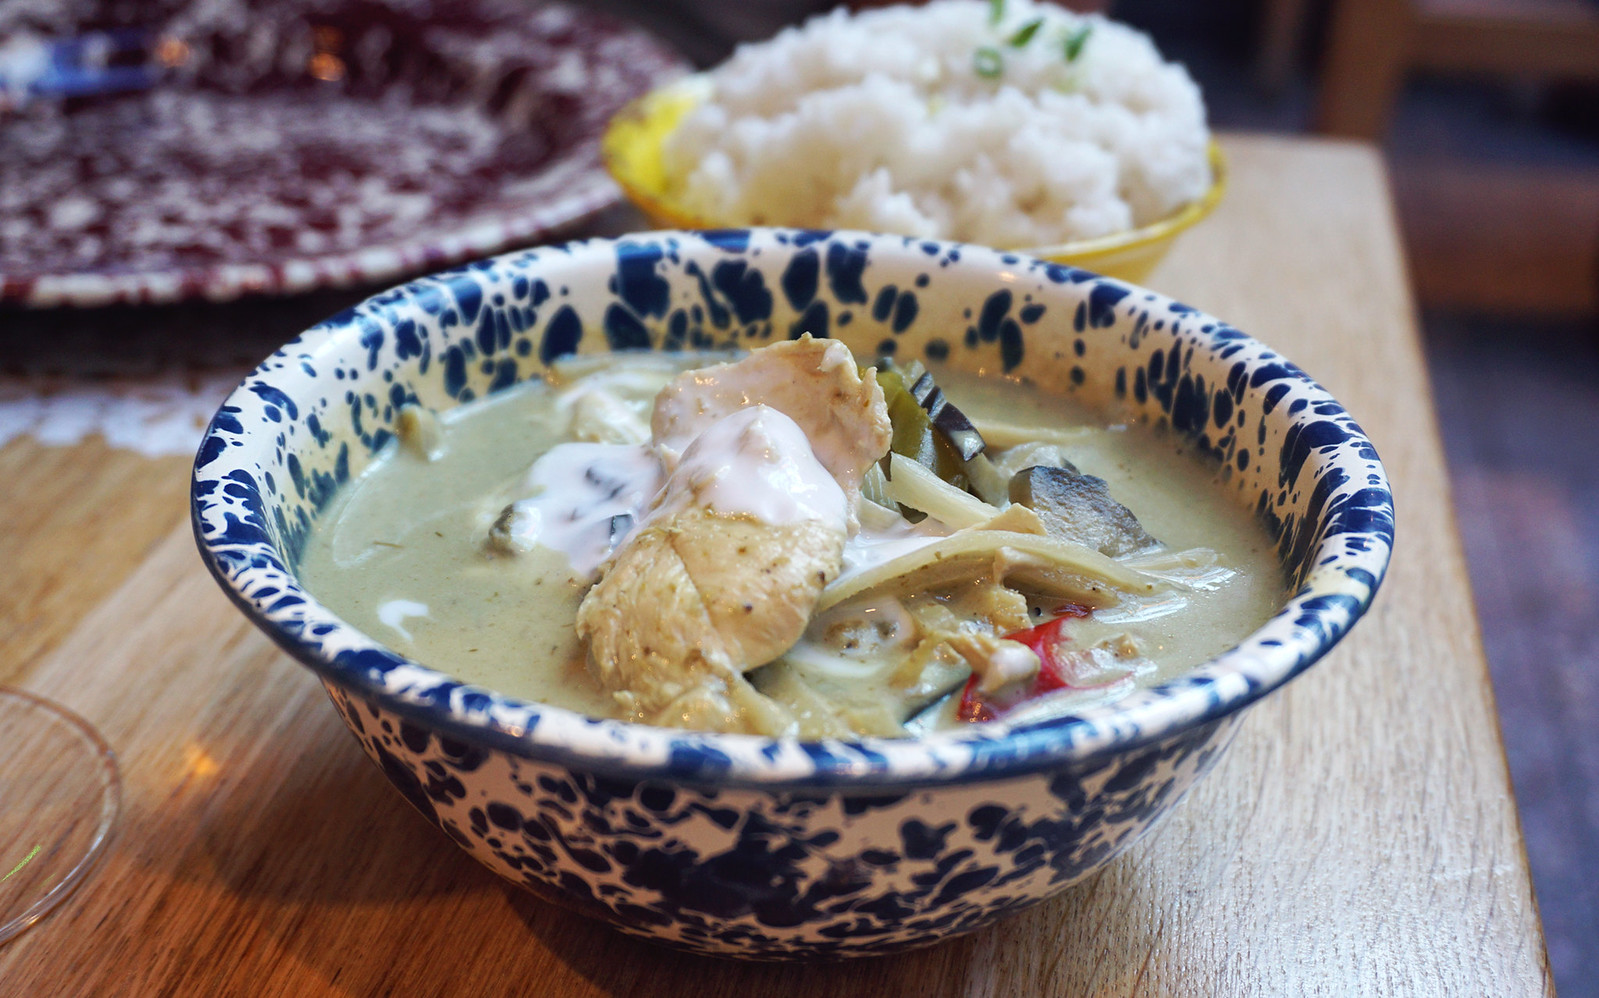 Thai green chicken curry from Rosa's Thai Cafe in Islington | gluten free Rosa's Thai Cafe